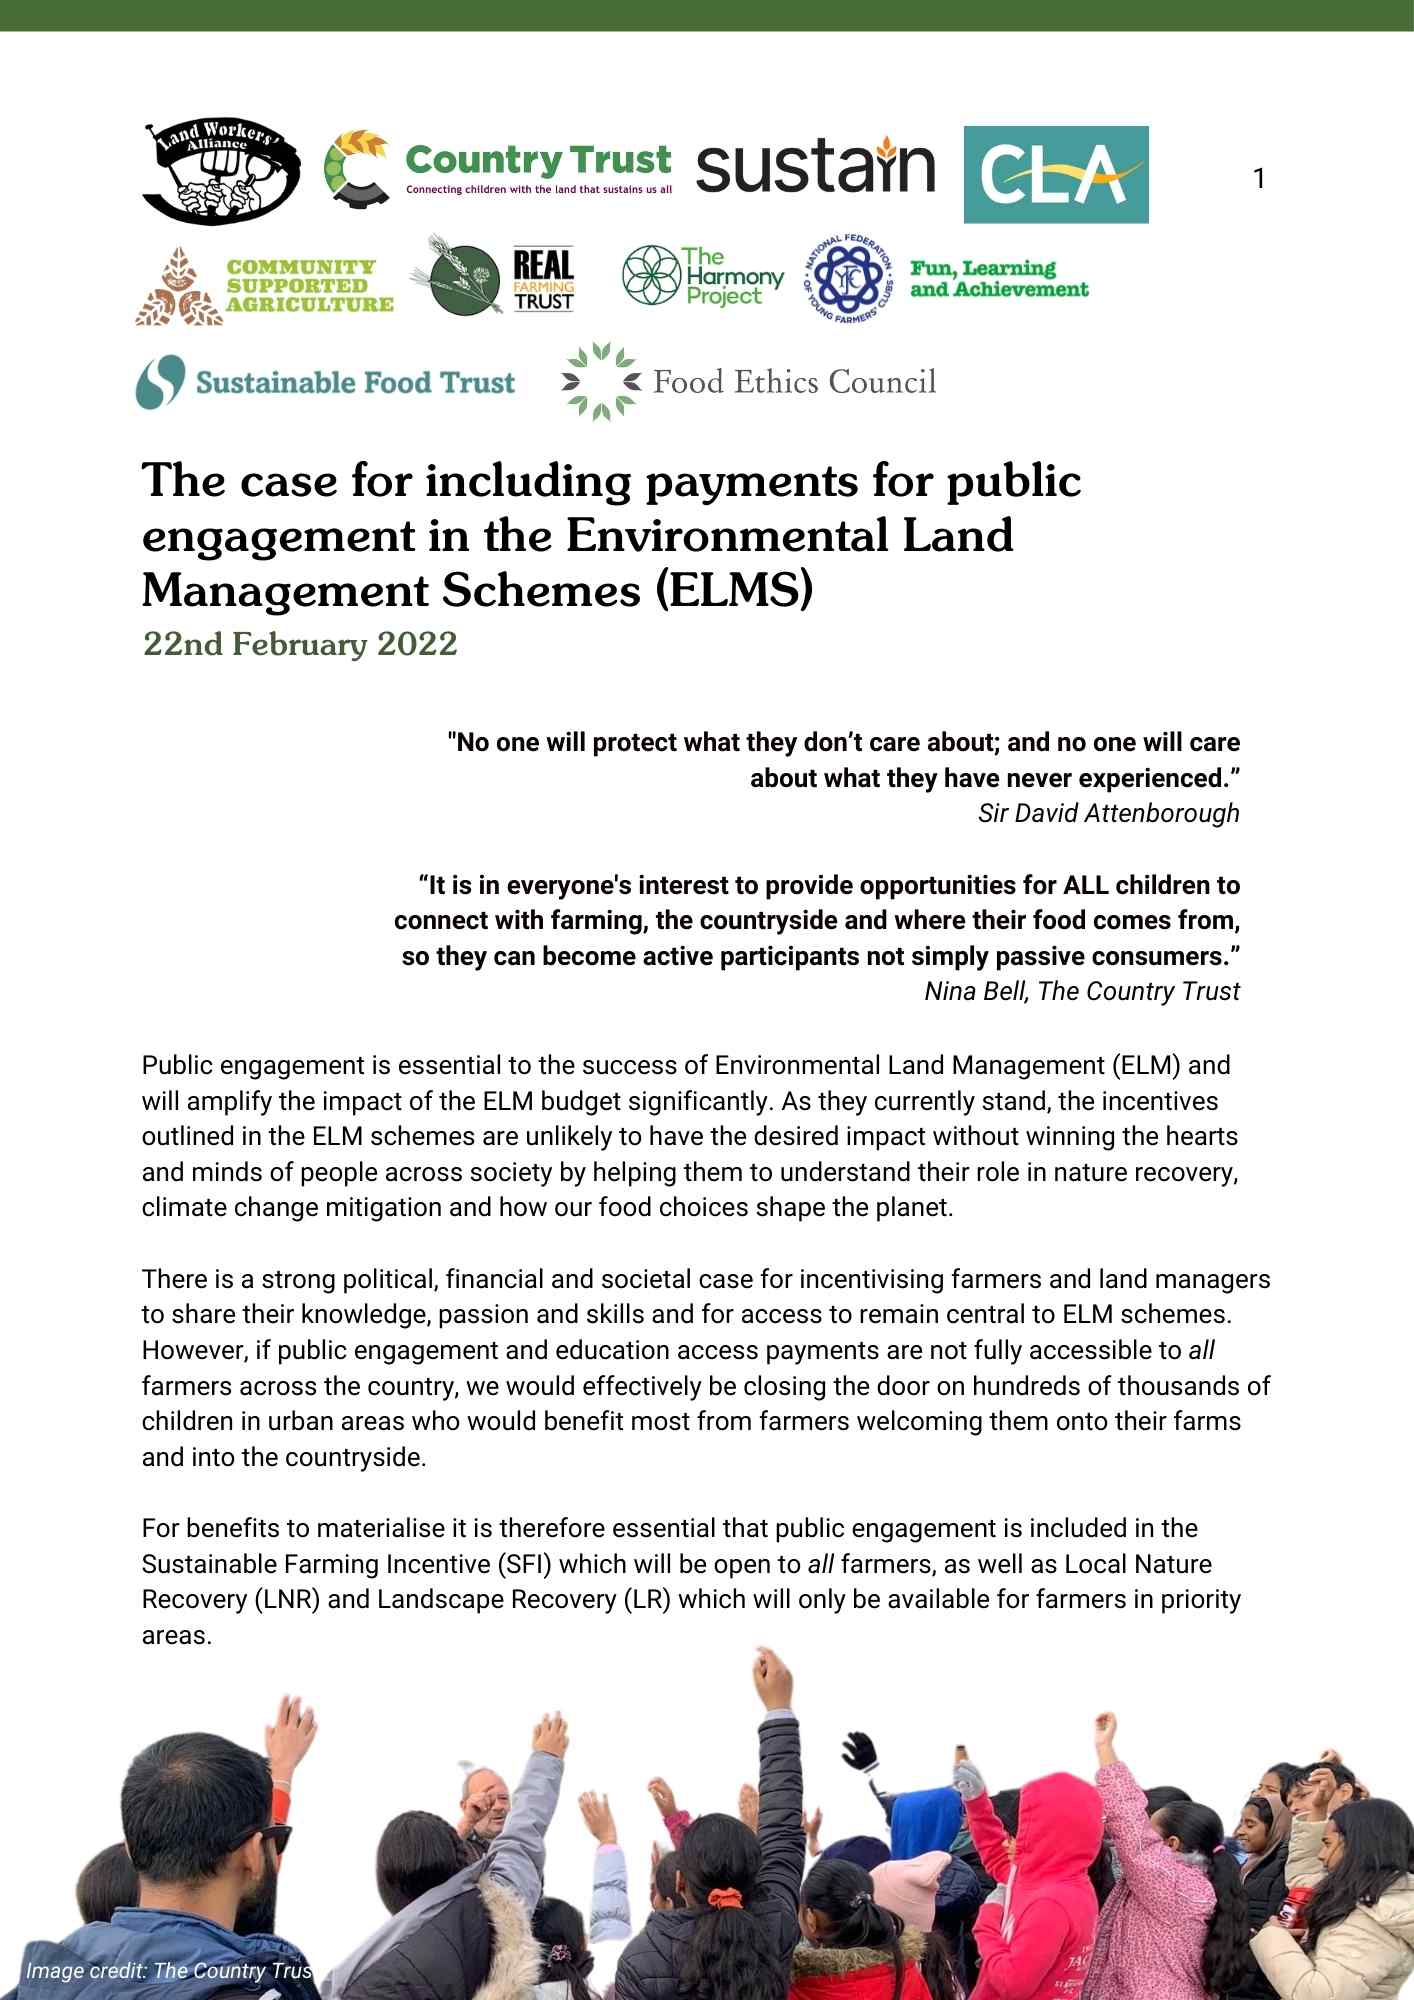 LWA urges Defra to include Payments for Public Engagement in ELMS